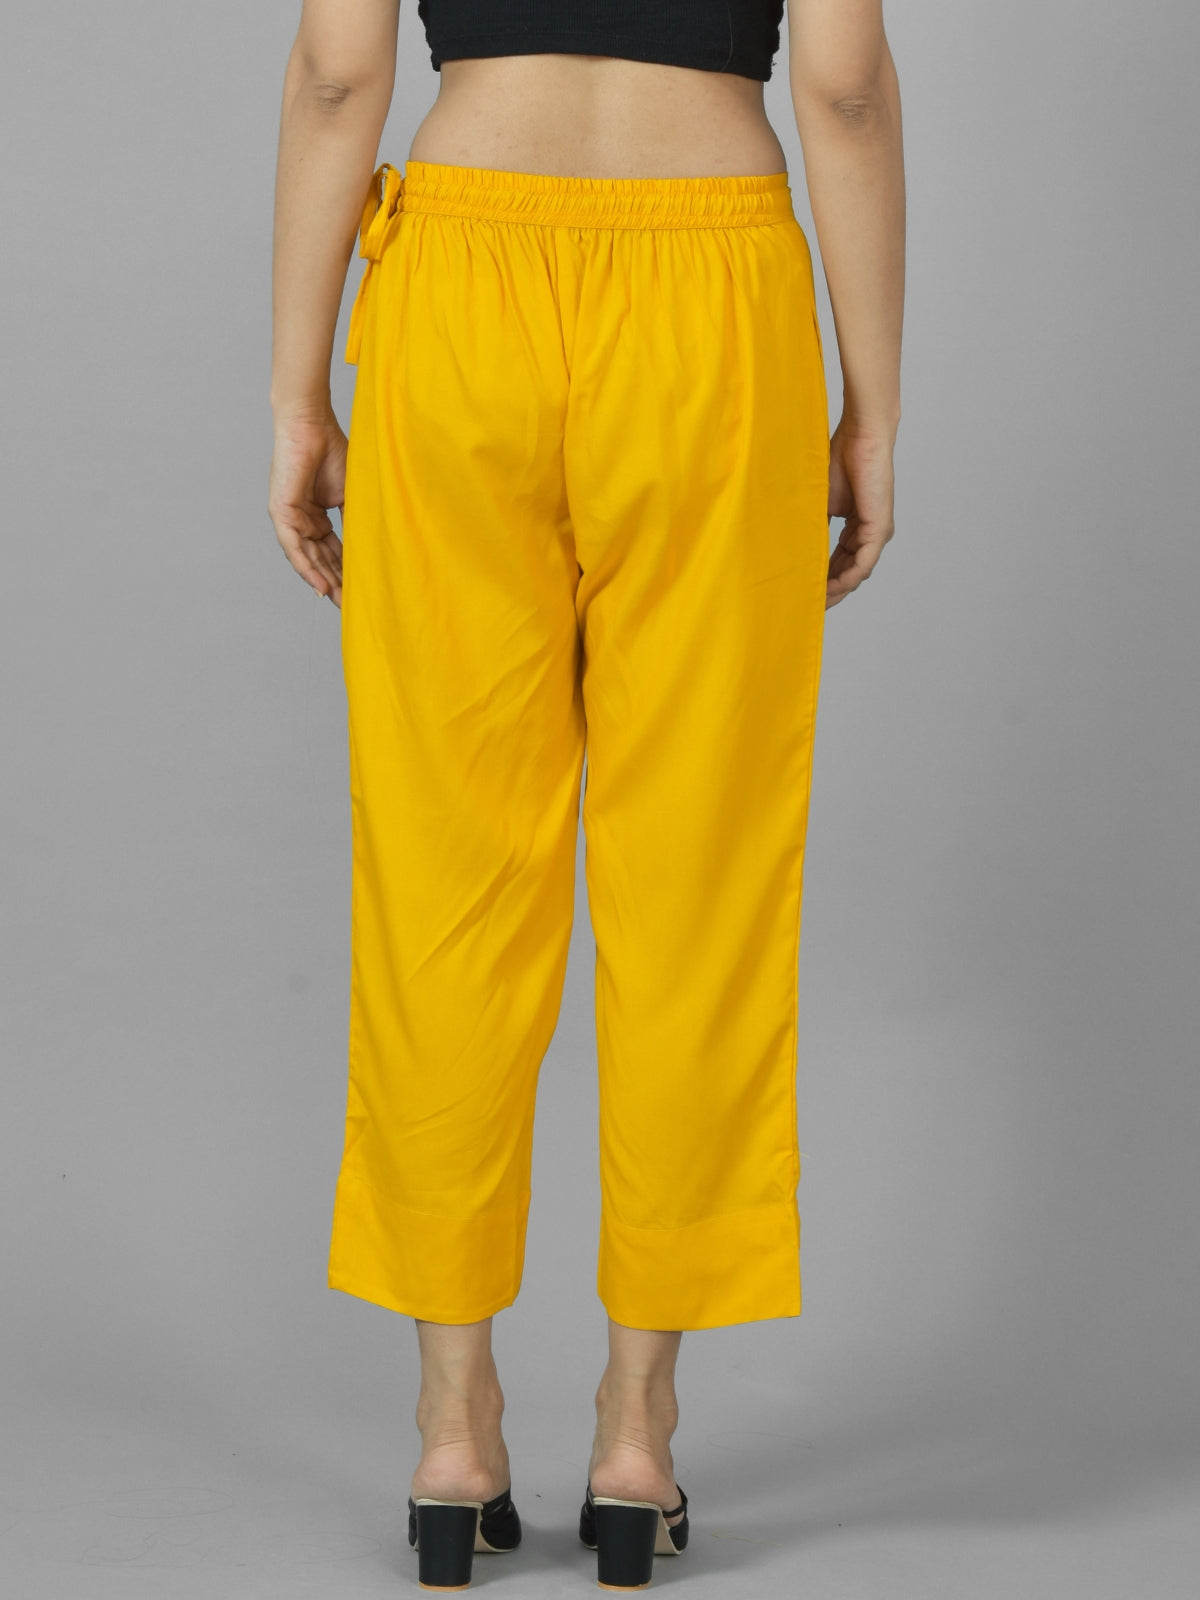 Pack Of 2 Womens Maroon And Mustard Ankle Length Rayon Culottes Trouser Combo